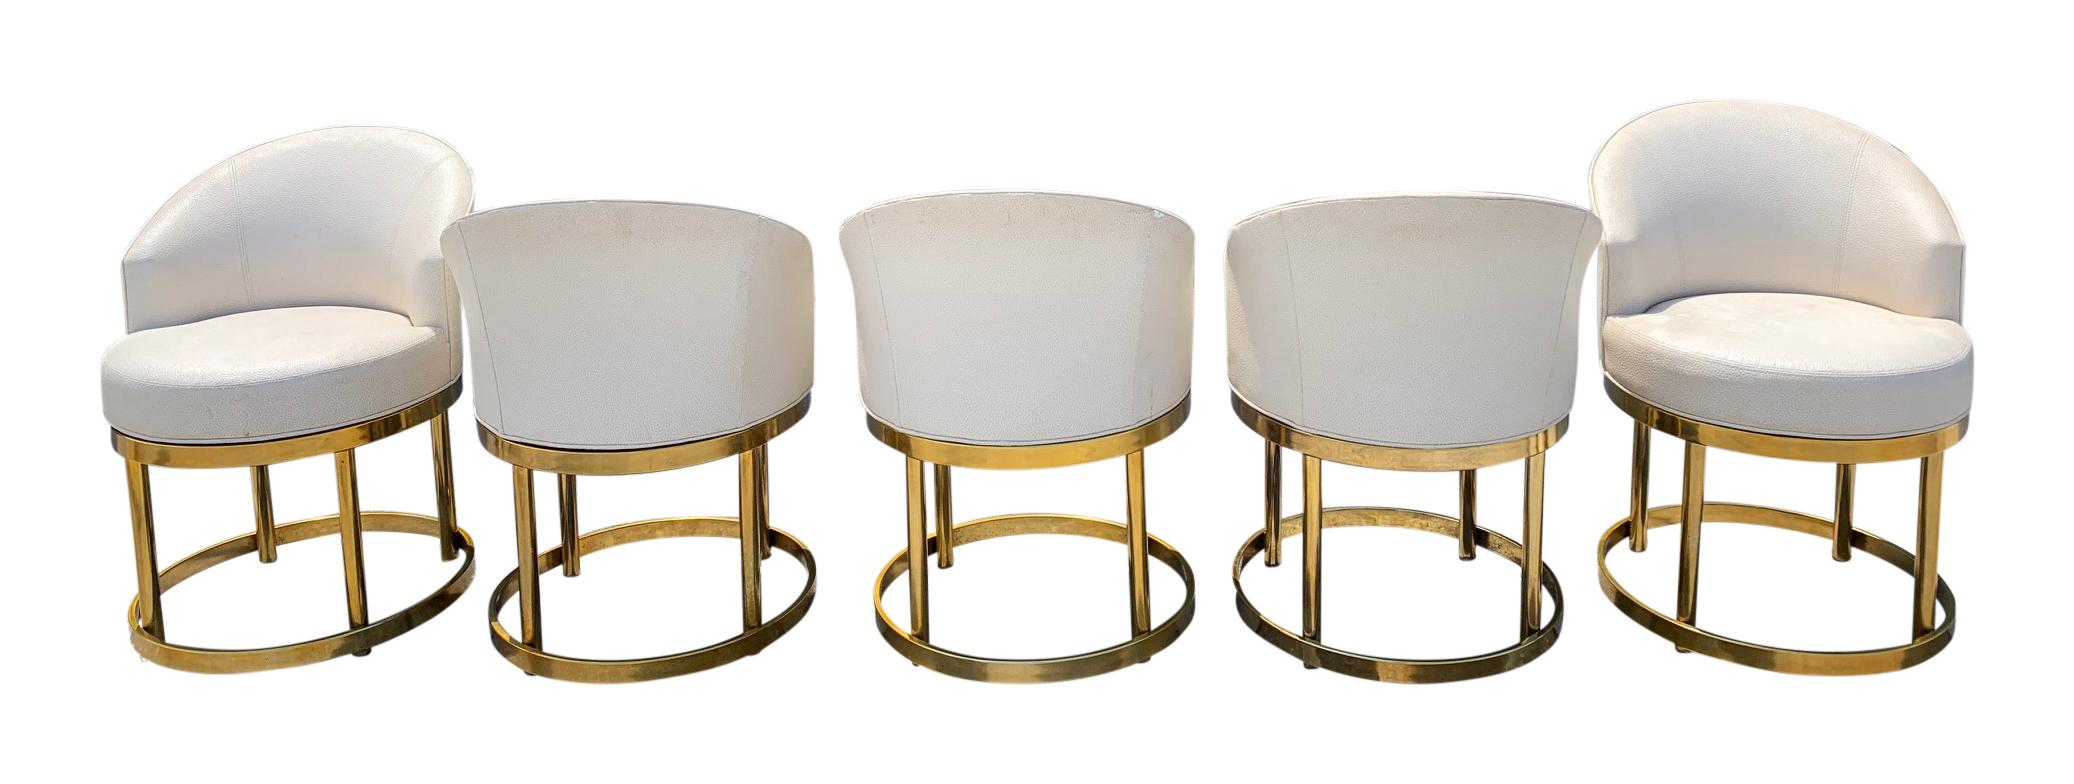 20th Century Swivel Stools on Brass Bases in the Manner of Milo Baughman